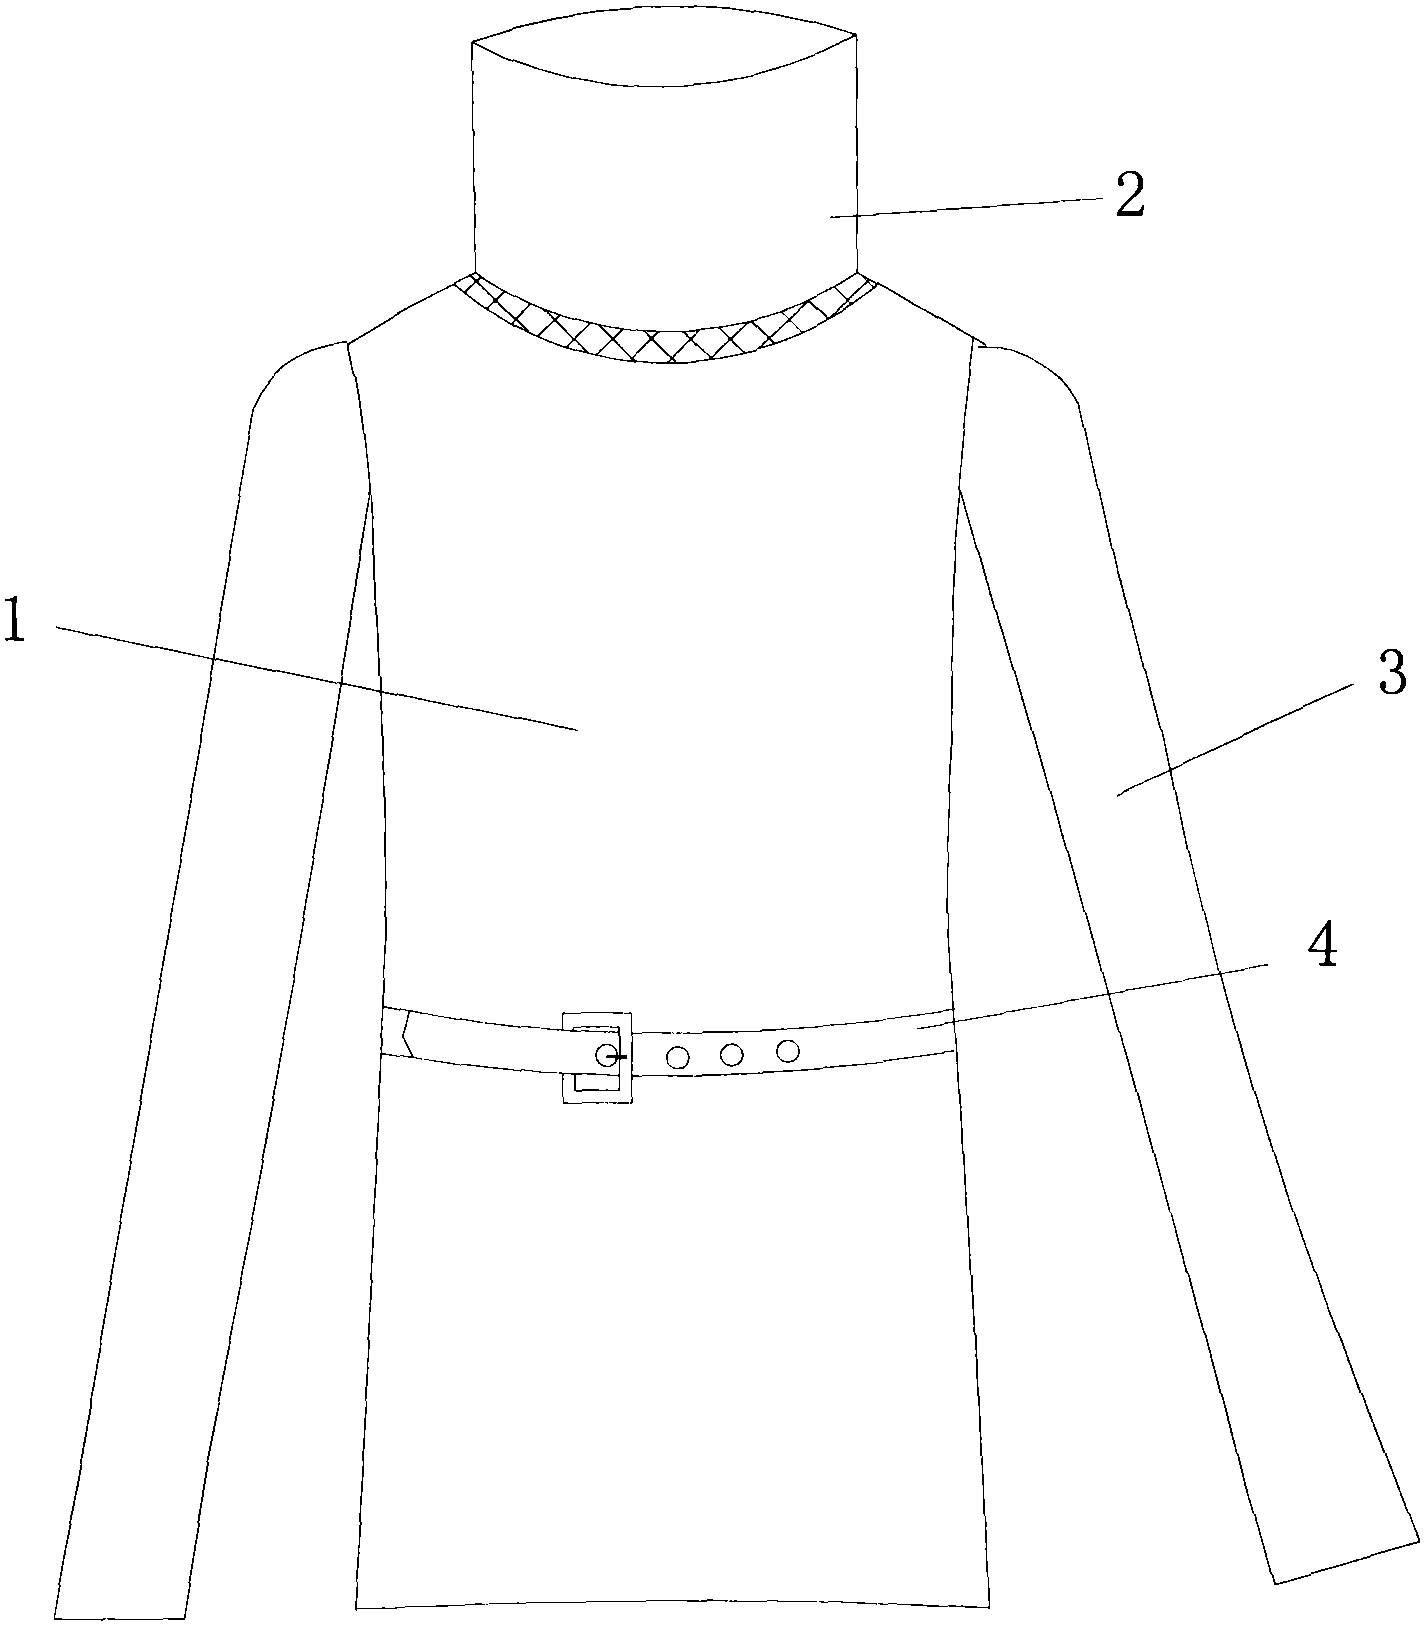 Water absorbing and guiding garment with shape memory function